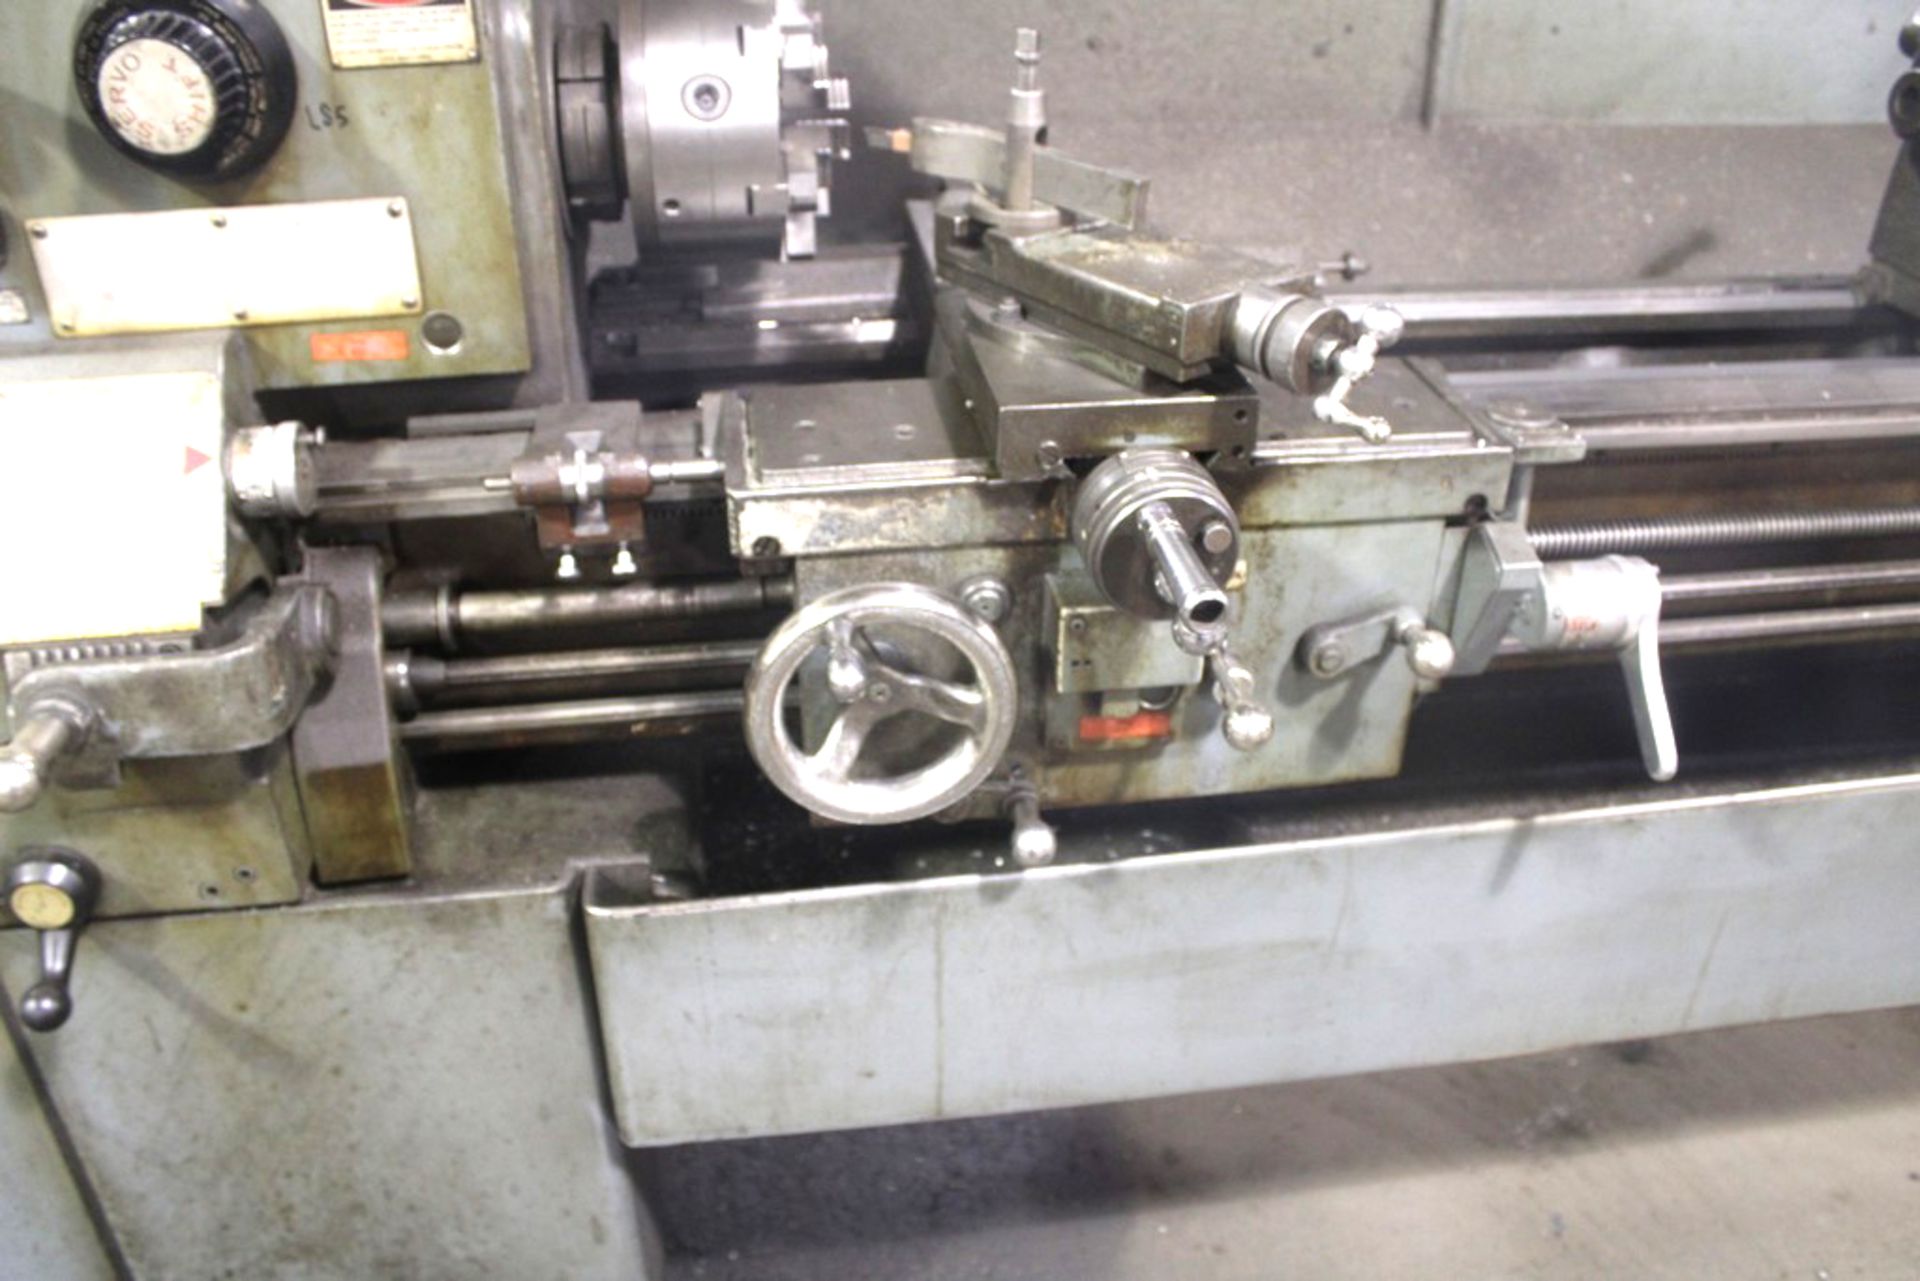 LEBLOND 15”X54” MODEL REGAL TOOLROOM LATHE, S/N 10C407, 1800 RPM SPINDLE, WITH 10” 6 - JAW CHUCK - Image 6 of 9